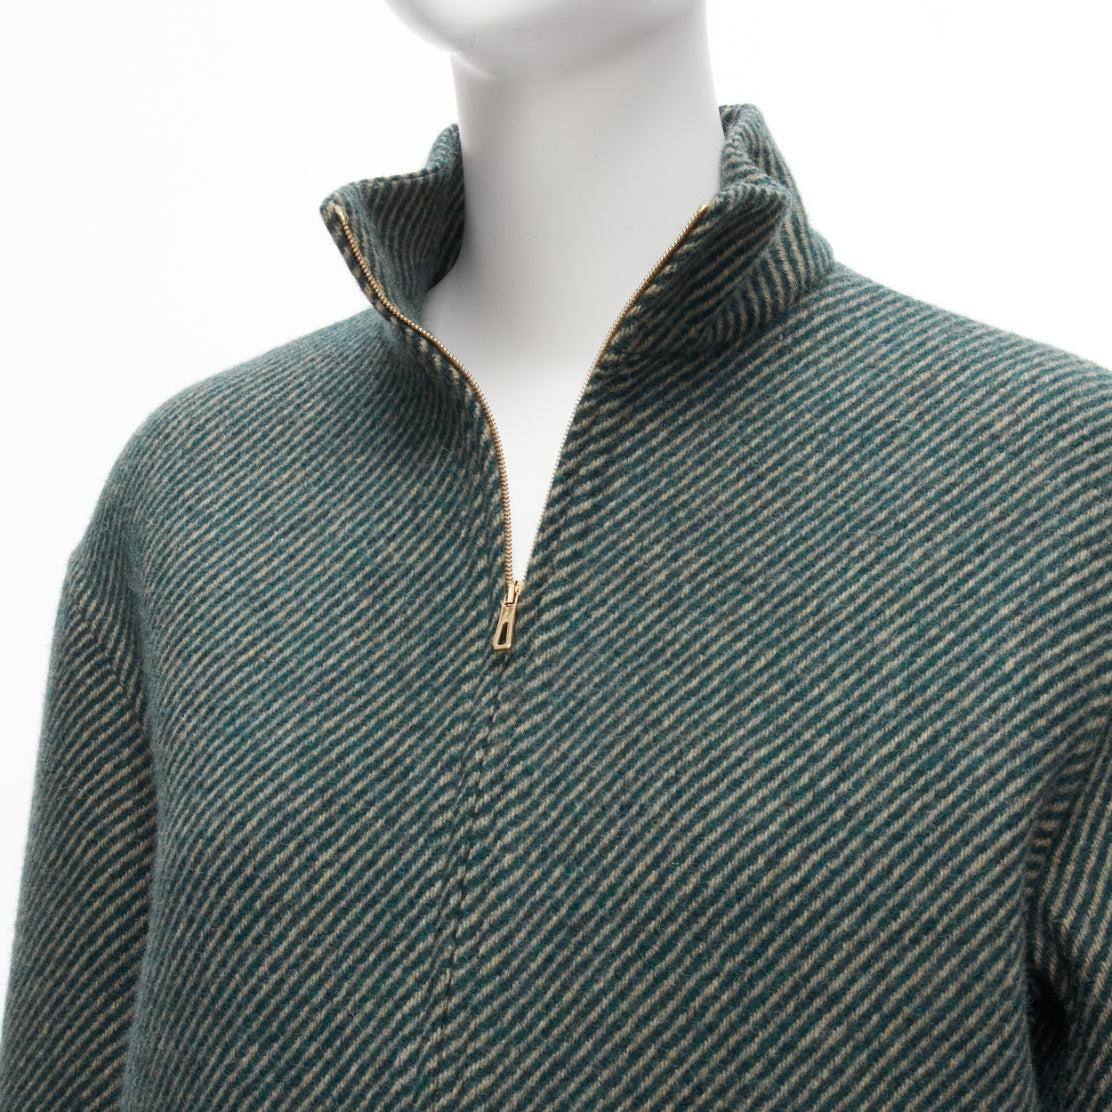 new HERMES Jean Paul Gaultier Vintage green double faced wool boxy jacket FR36 S
Reference: SNKO/A00261
Brand: Hermes
Designer: Jean Paul Gaultier
Material: Wool
Color: Green, Beige
Pattern: Striped
Closure: Zip
Lining: Beige Wool
Extra Details: